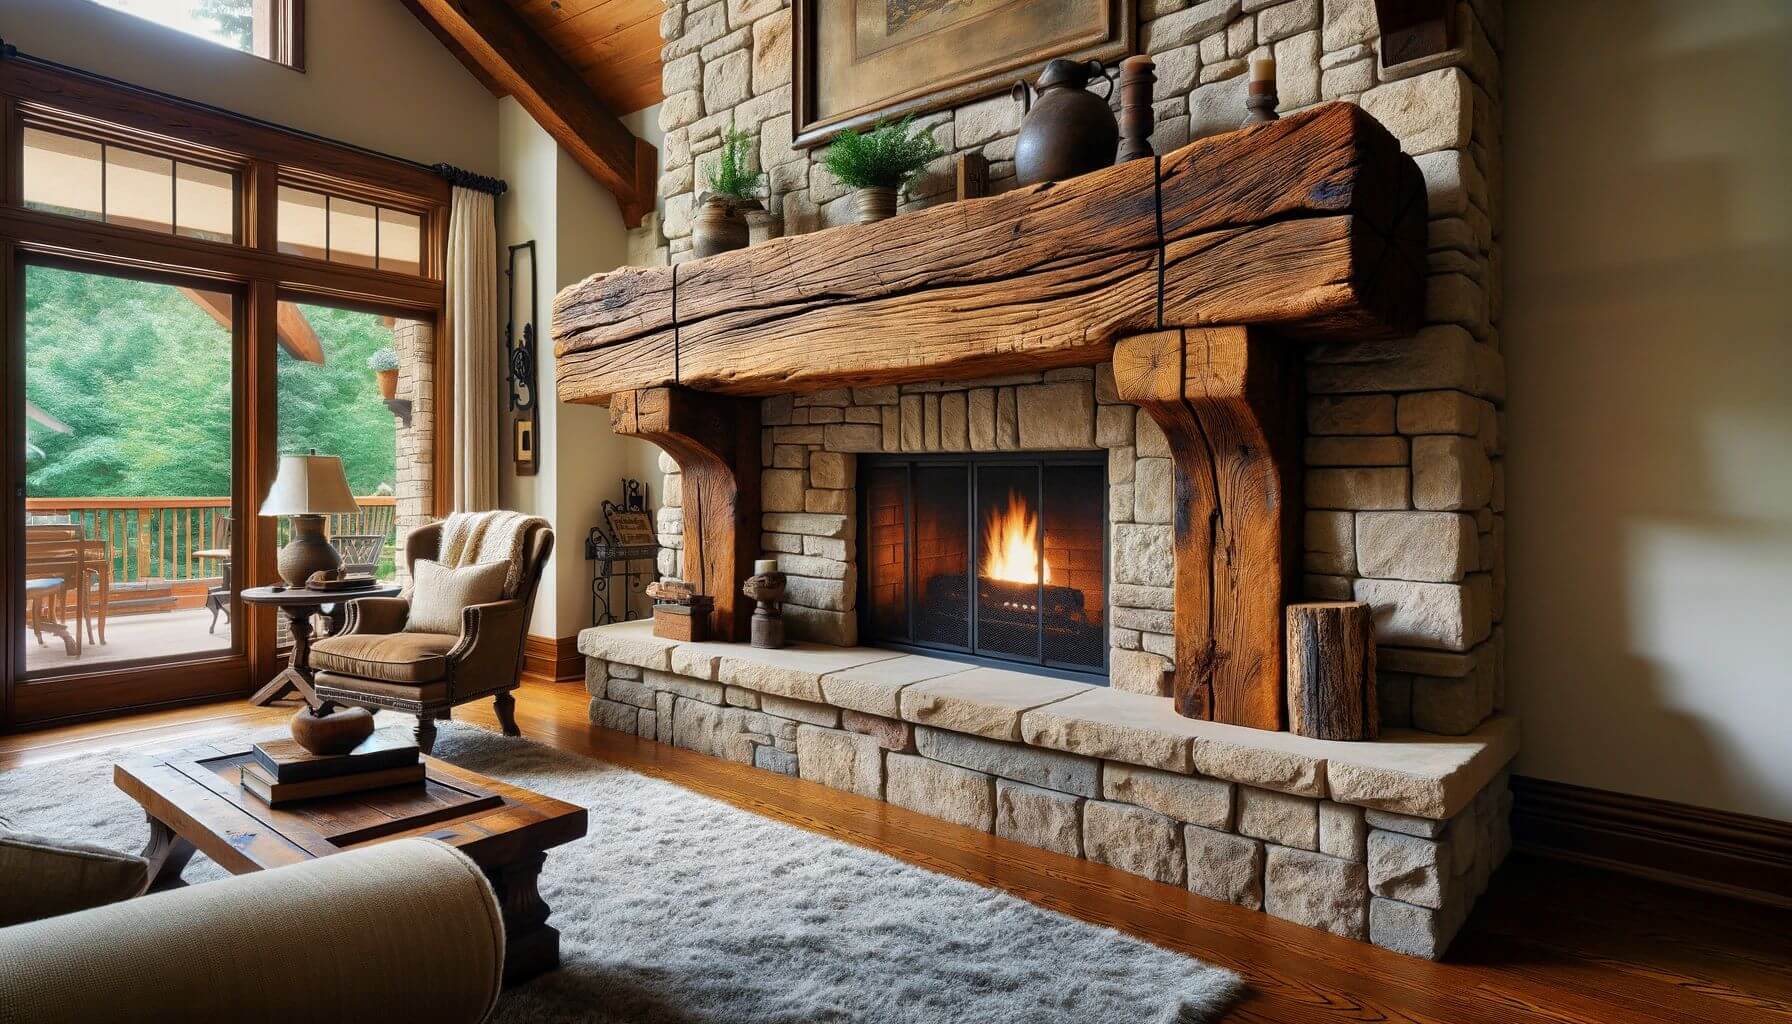 Installing a rustic wood beam as a mantel on a 1970s stone fireplace